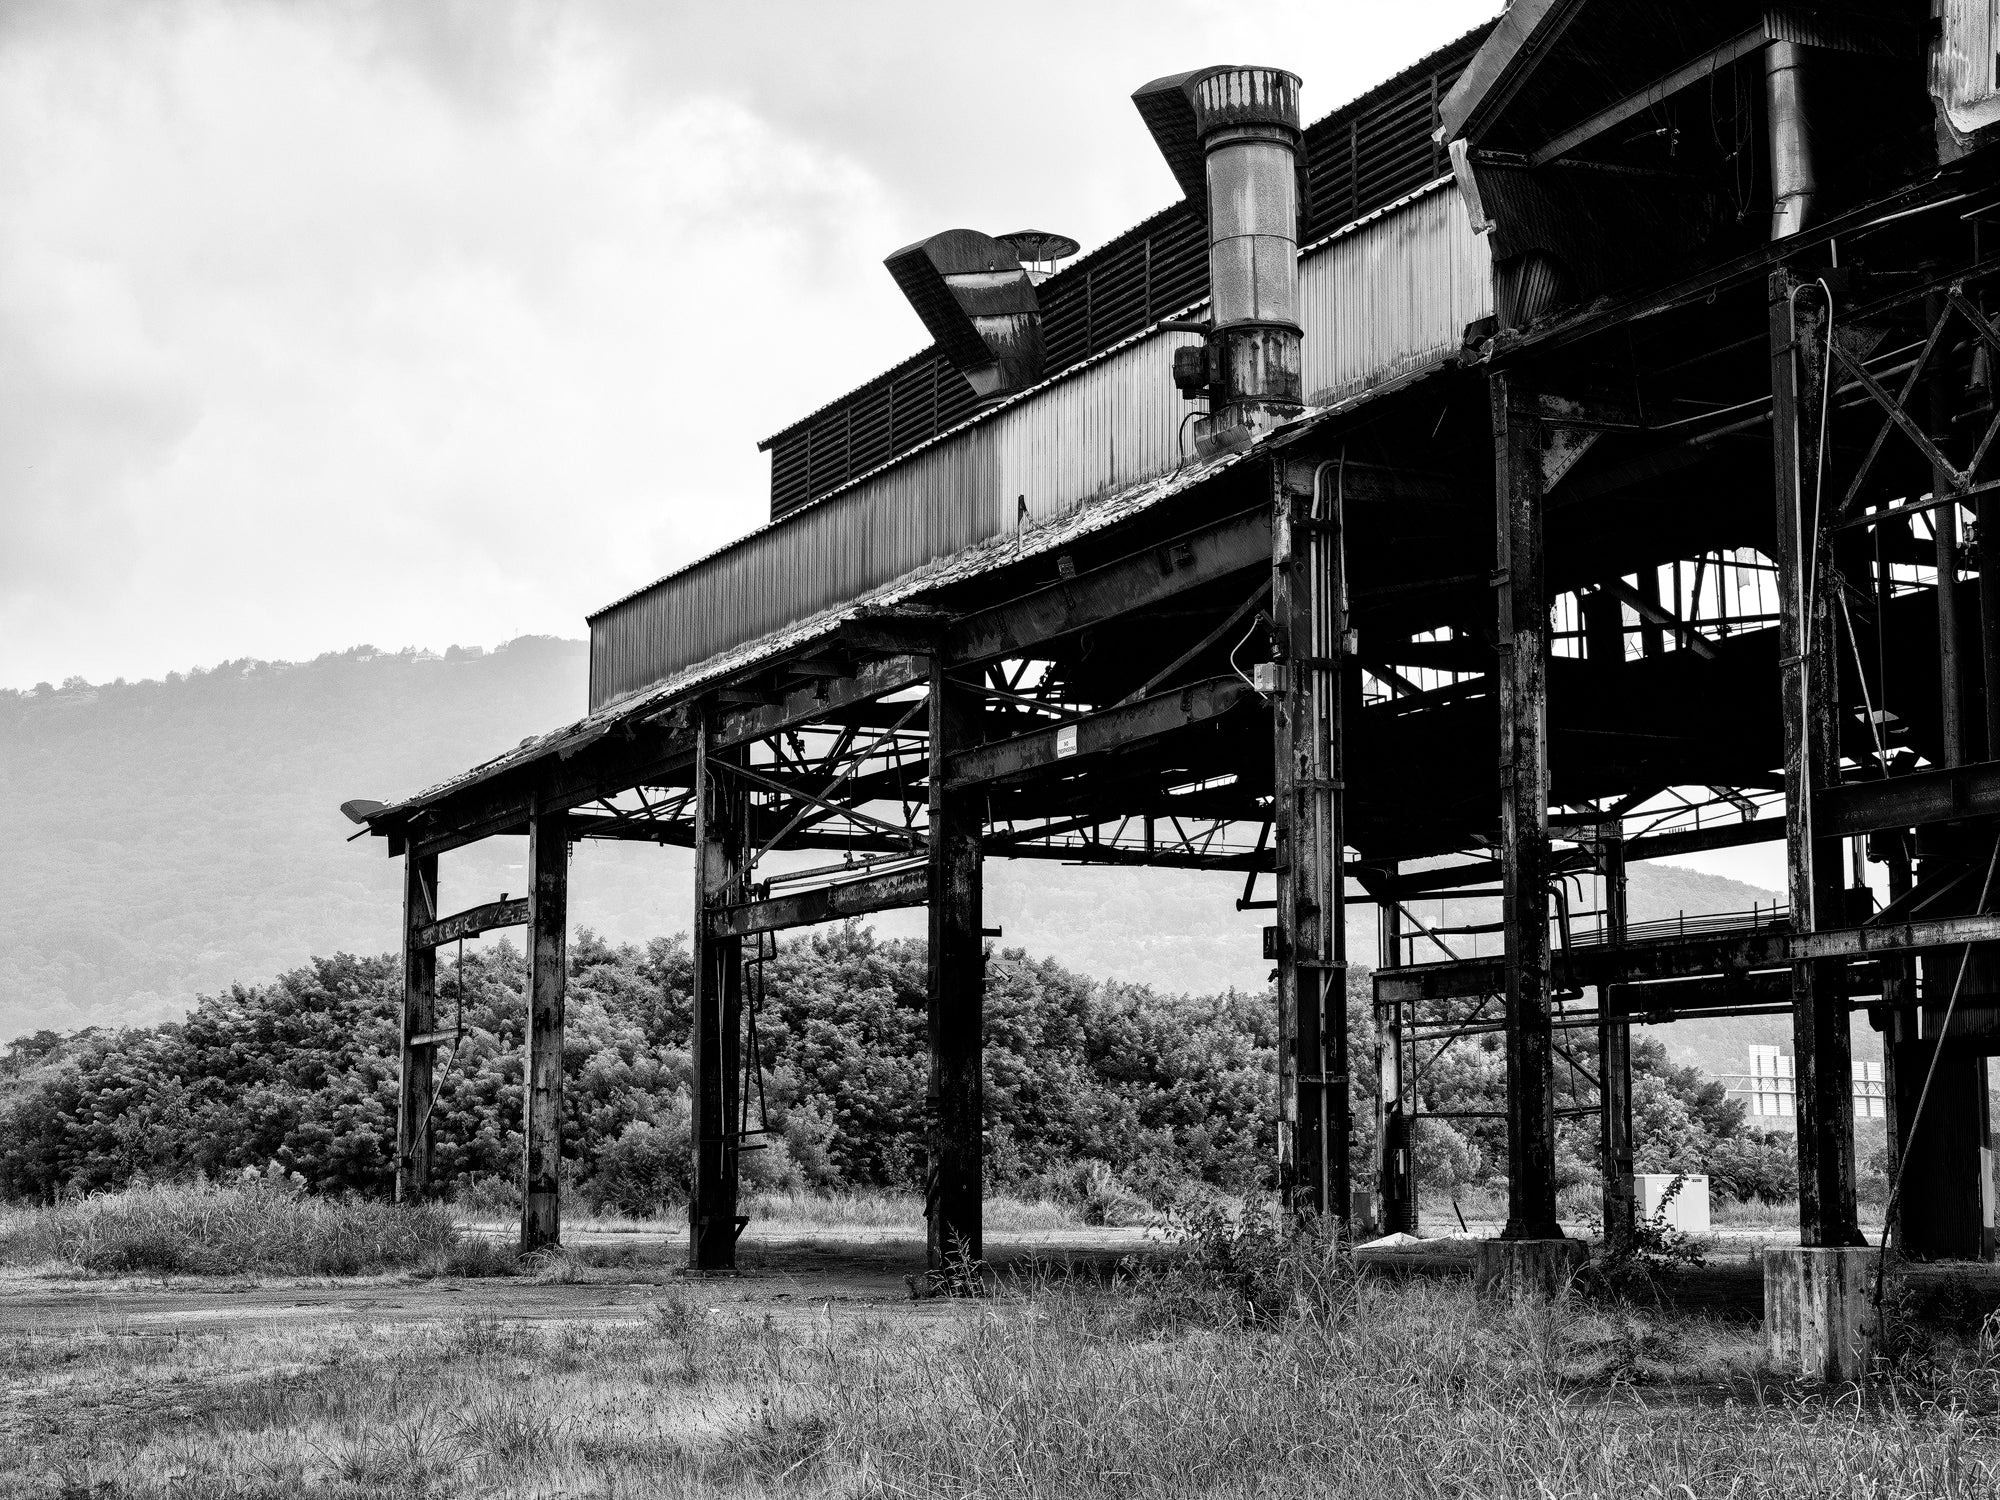 Black and white medium format photograph of the ruins of the vast abandoned Wheland Foundry in Chattanooga with a misty mountain in the distance.